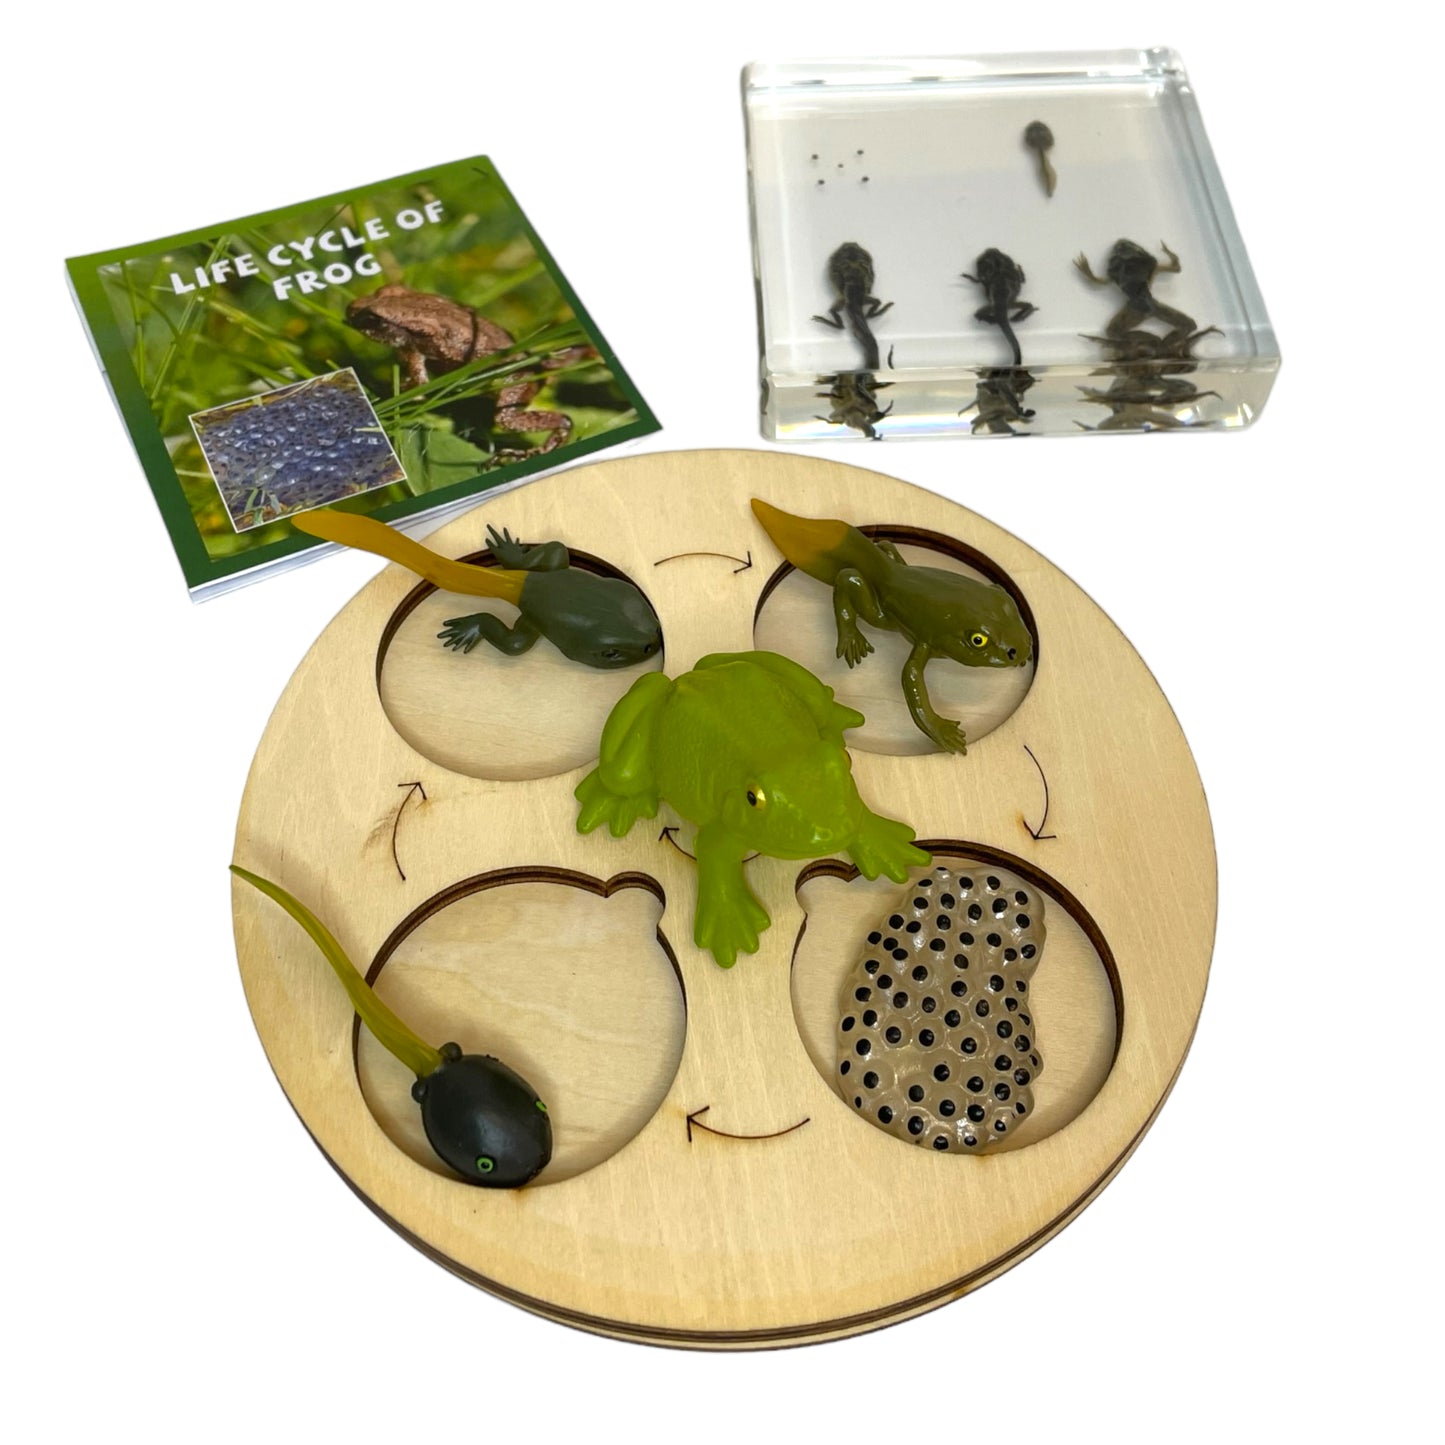 Butterfly Frog Plant Life Cycle Resin Epoxy Specimens Blocks for Kindergarten Stages of Seedling